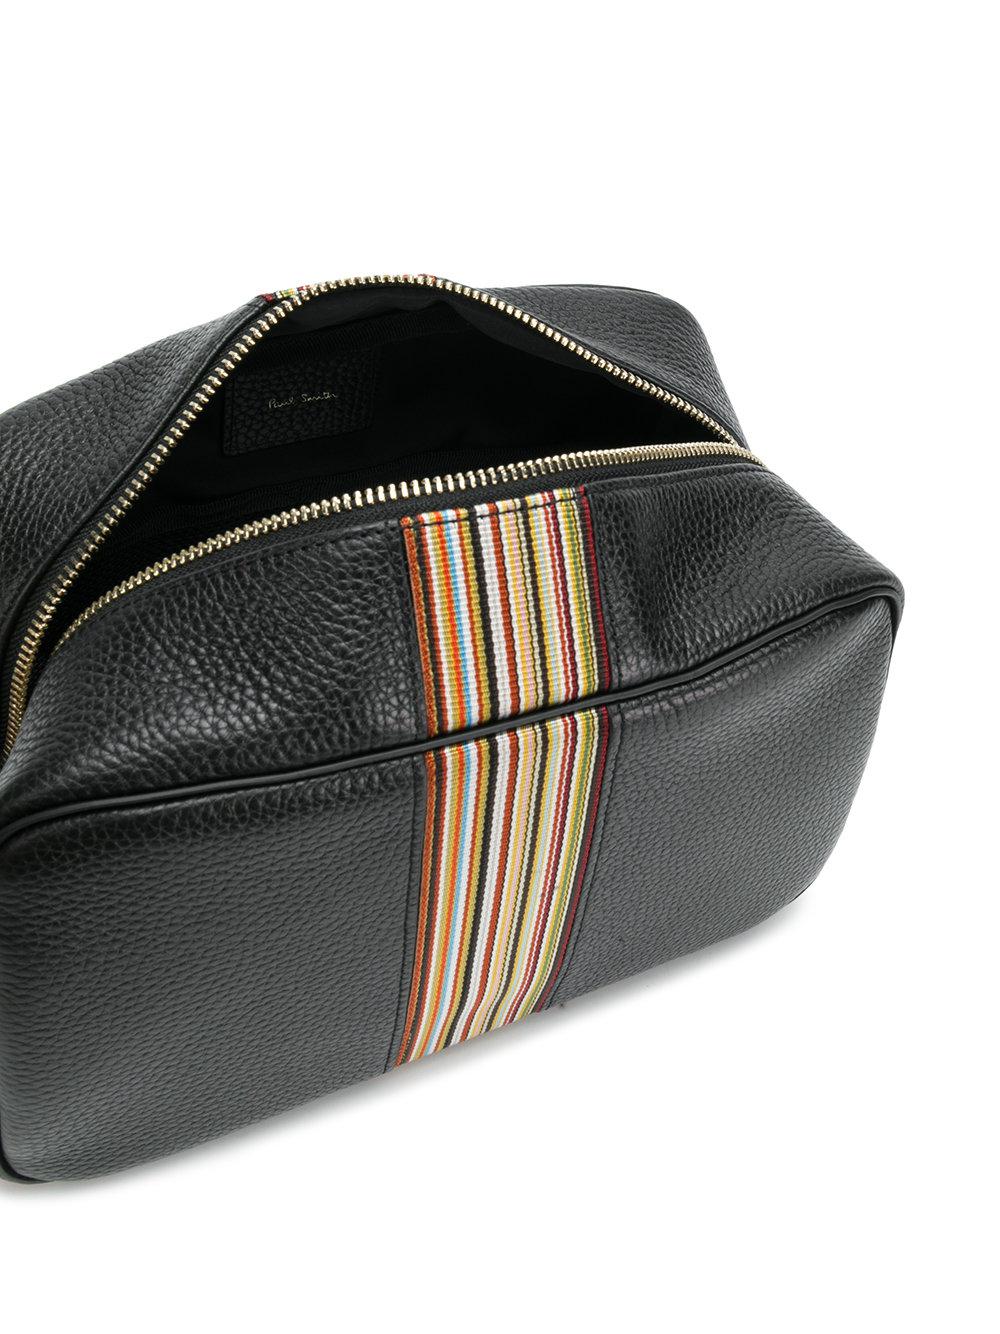 Paul Smith Leather Signature Stripe Wash Bag in Black for Men - Lyst